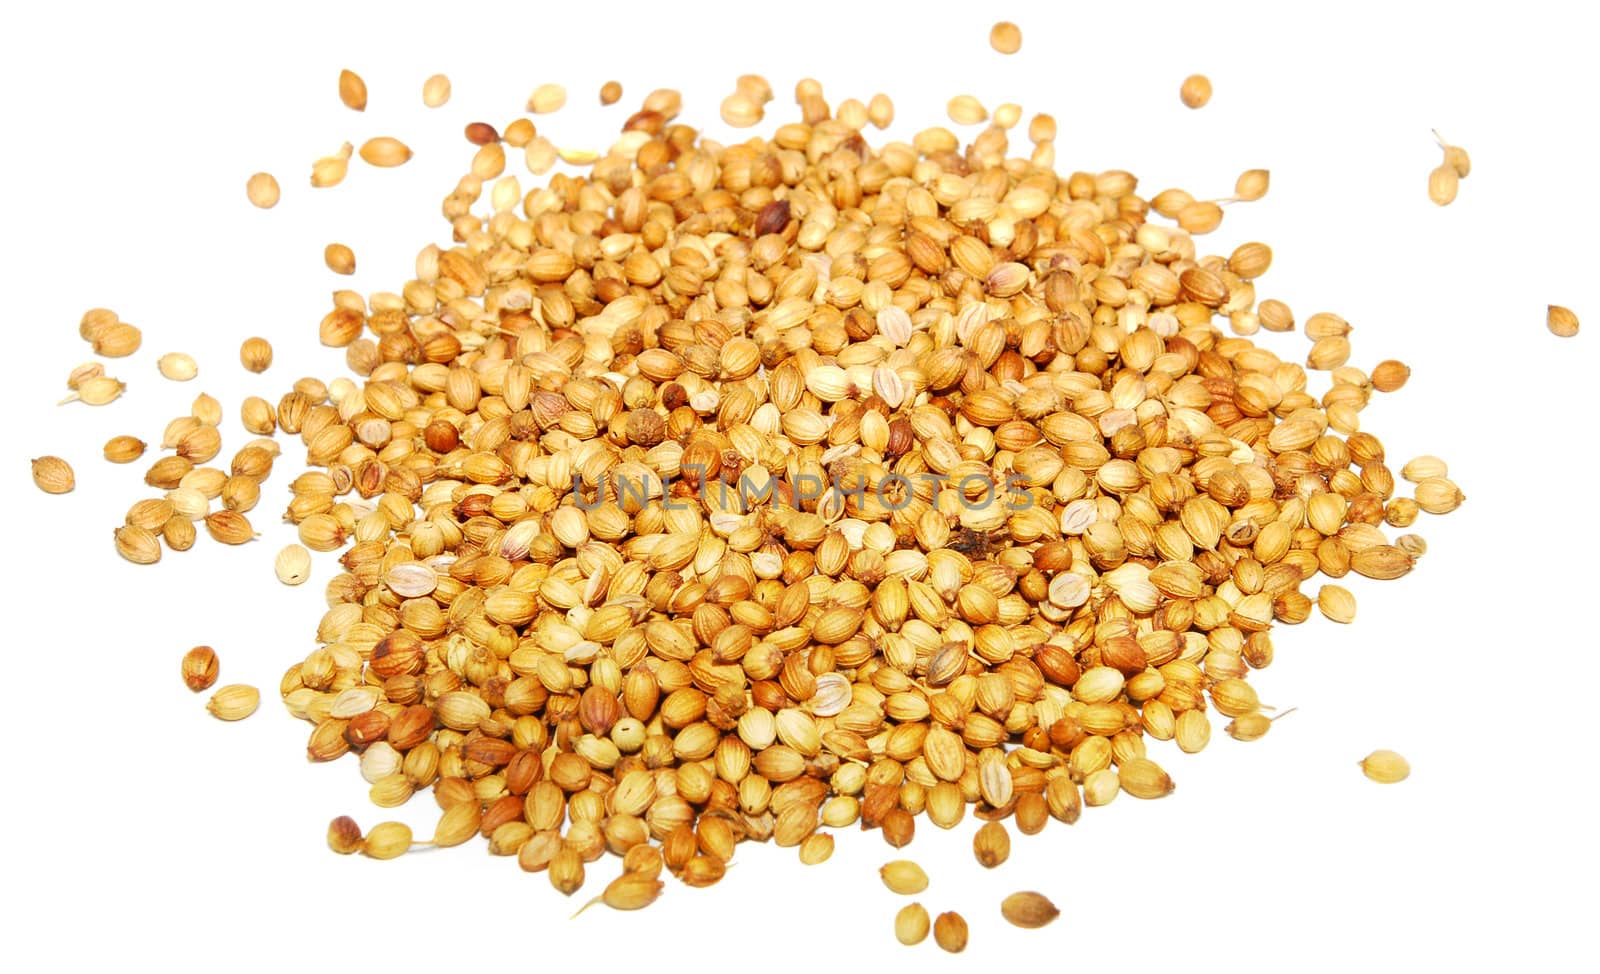 Whole coriander seeds, isolated on a white background